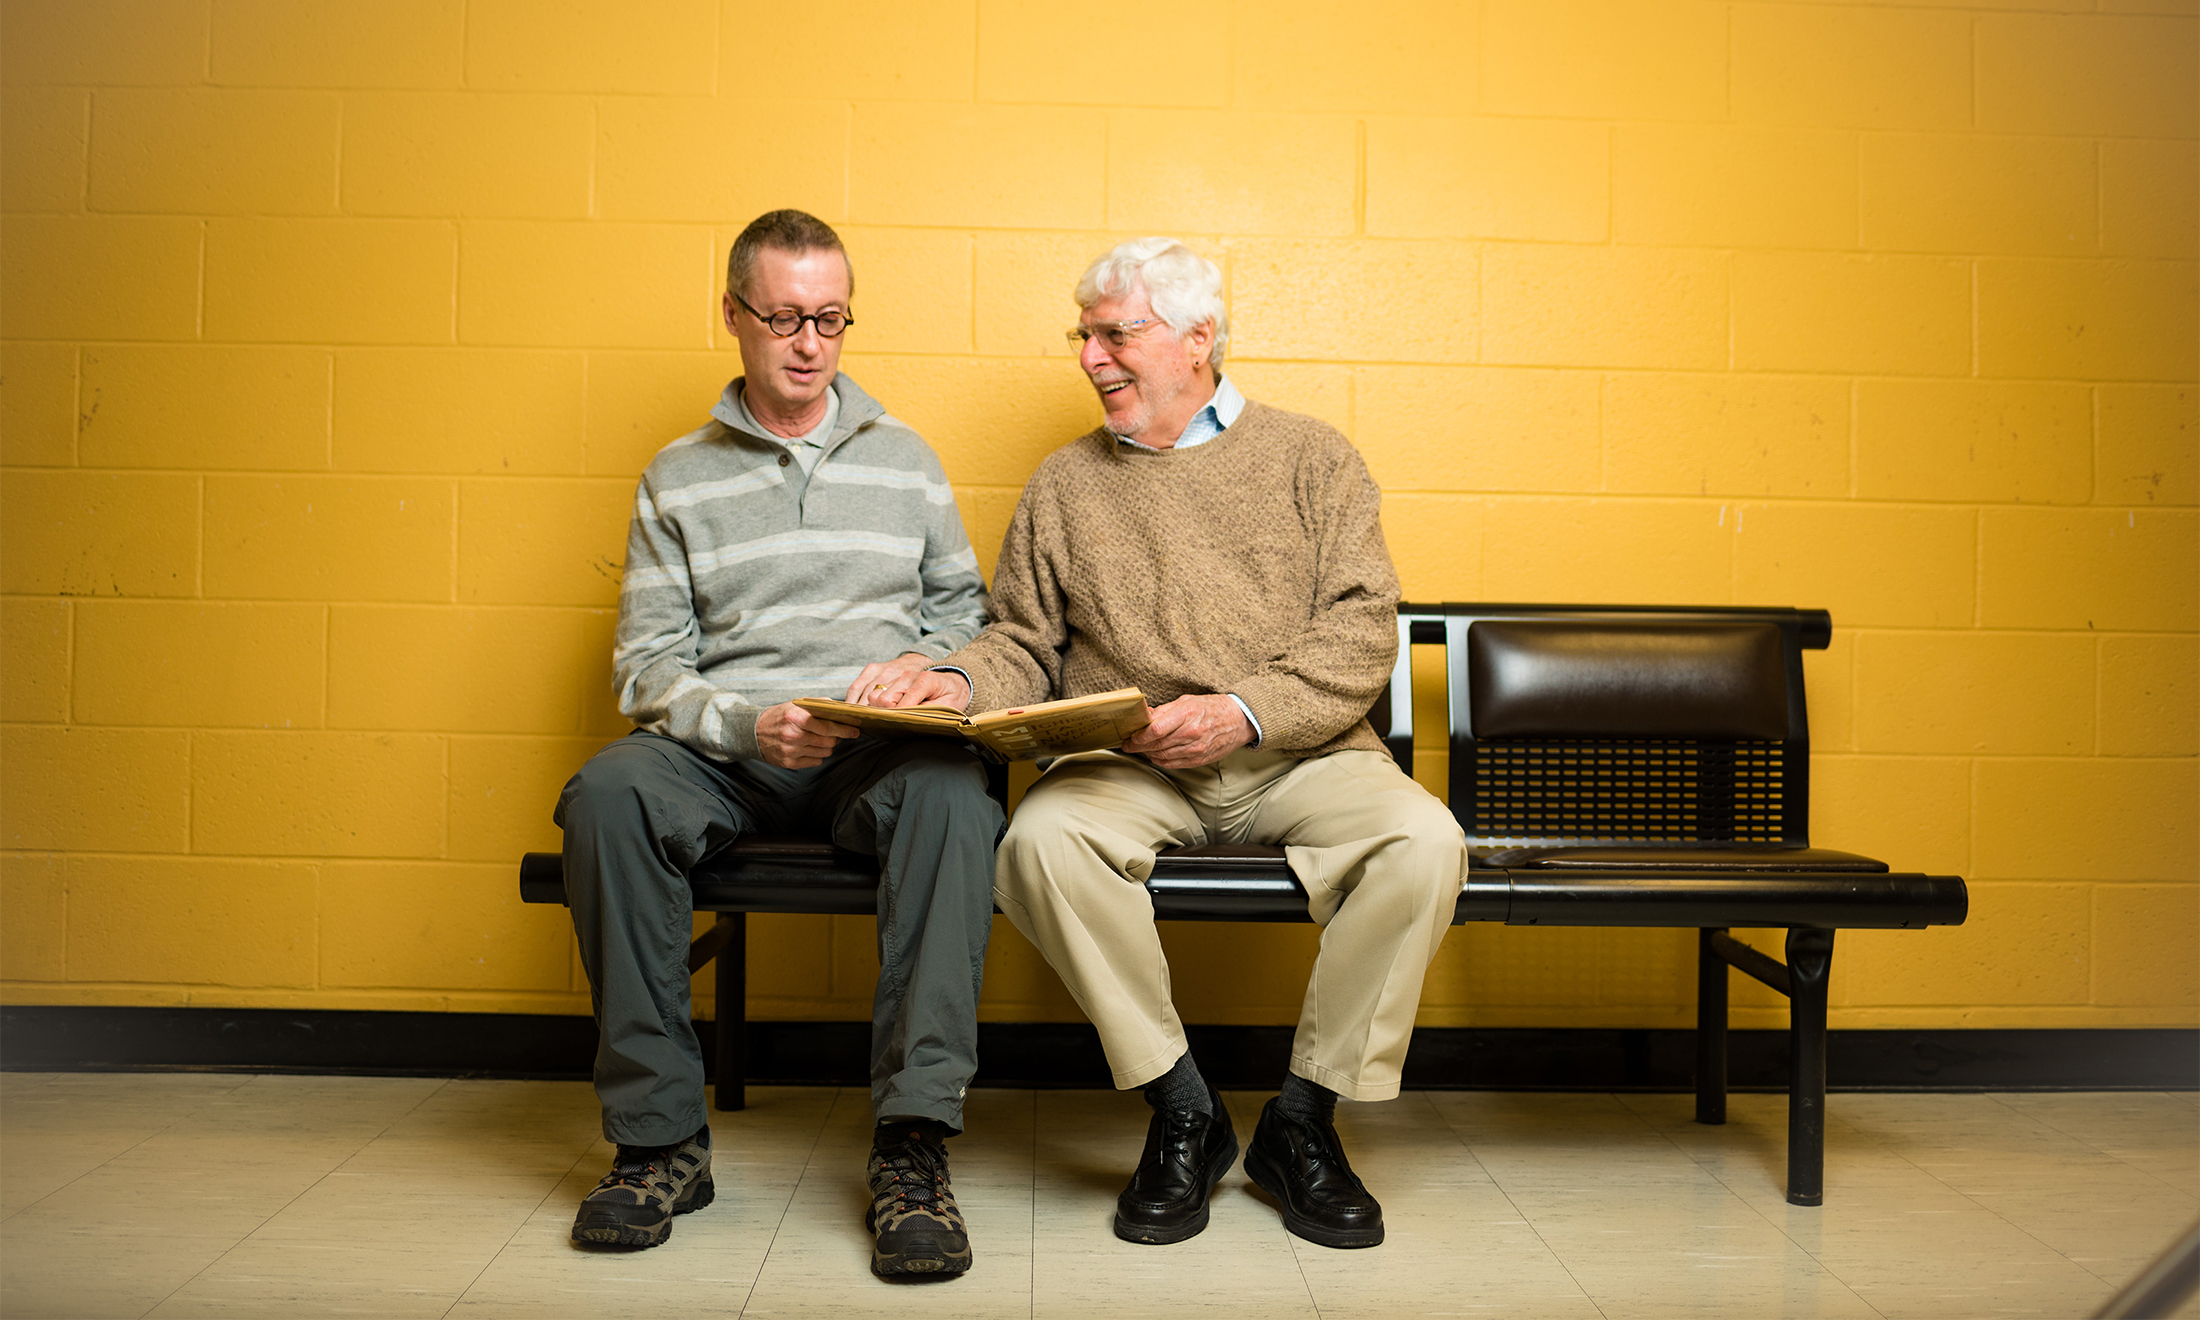 Oakland University alumni Bruce Voss and Al Monetta sit in front of a gold wall on campus